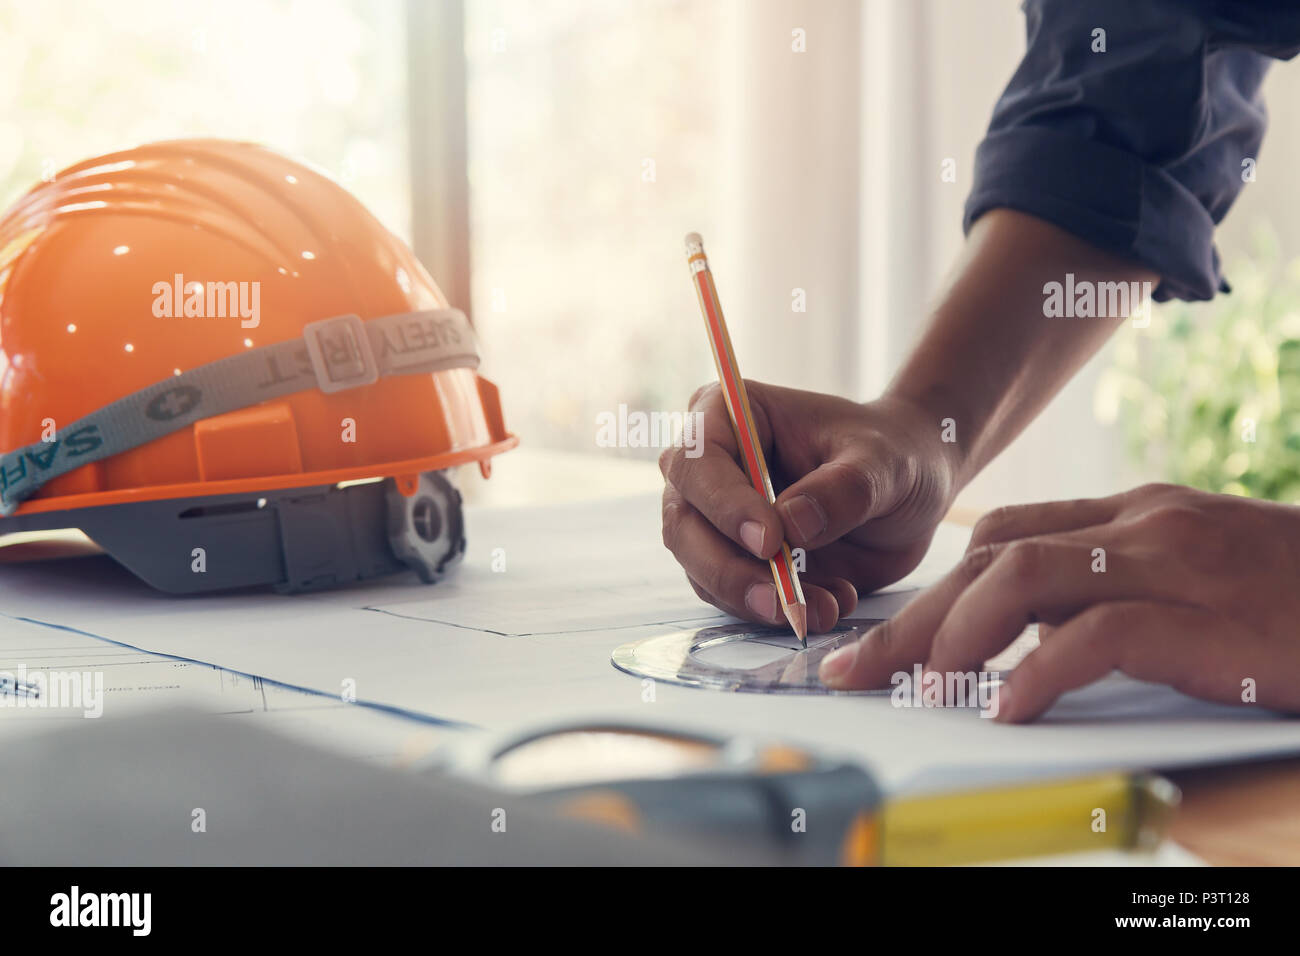 Architect or engineer using pencil and protractor working on blueprint, architectural concept Stock Photo